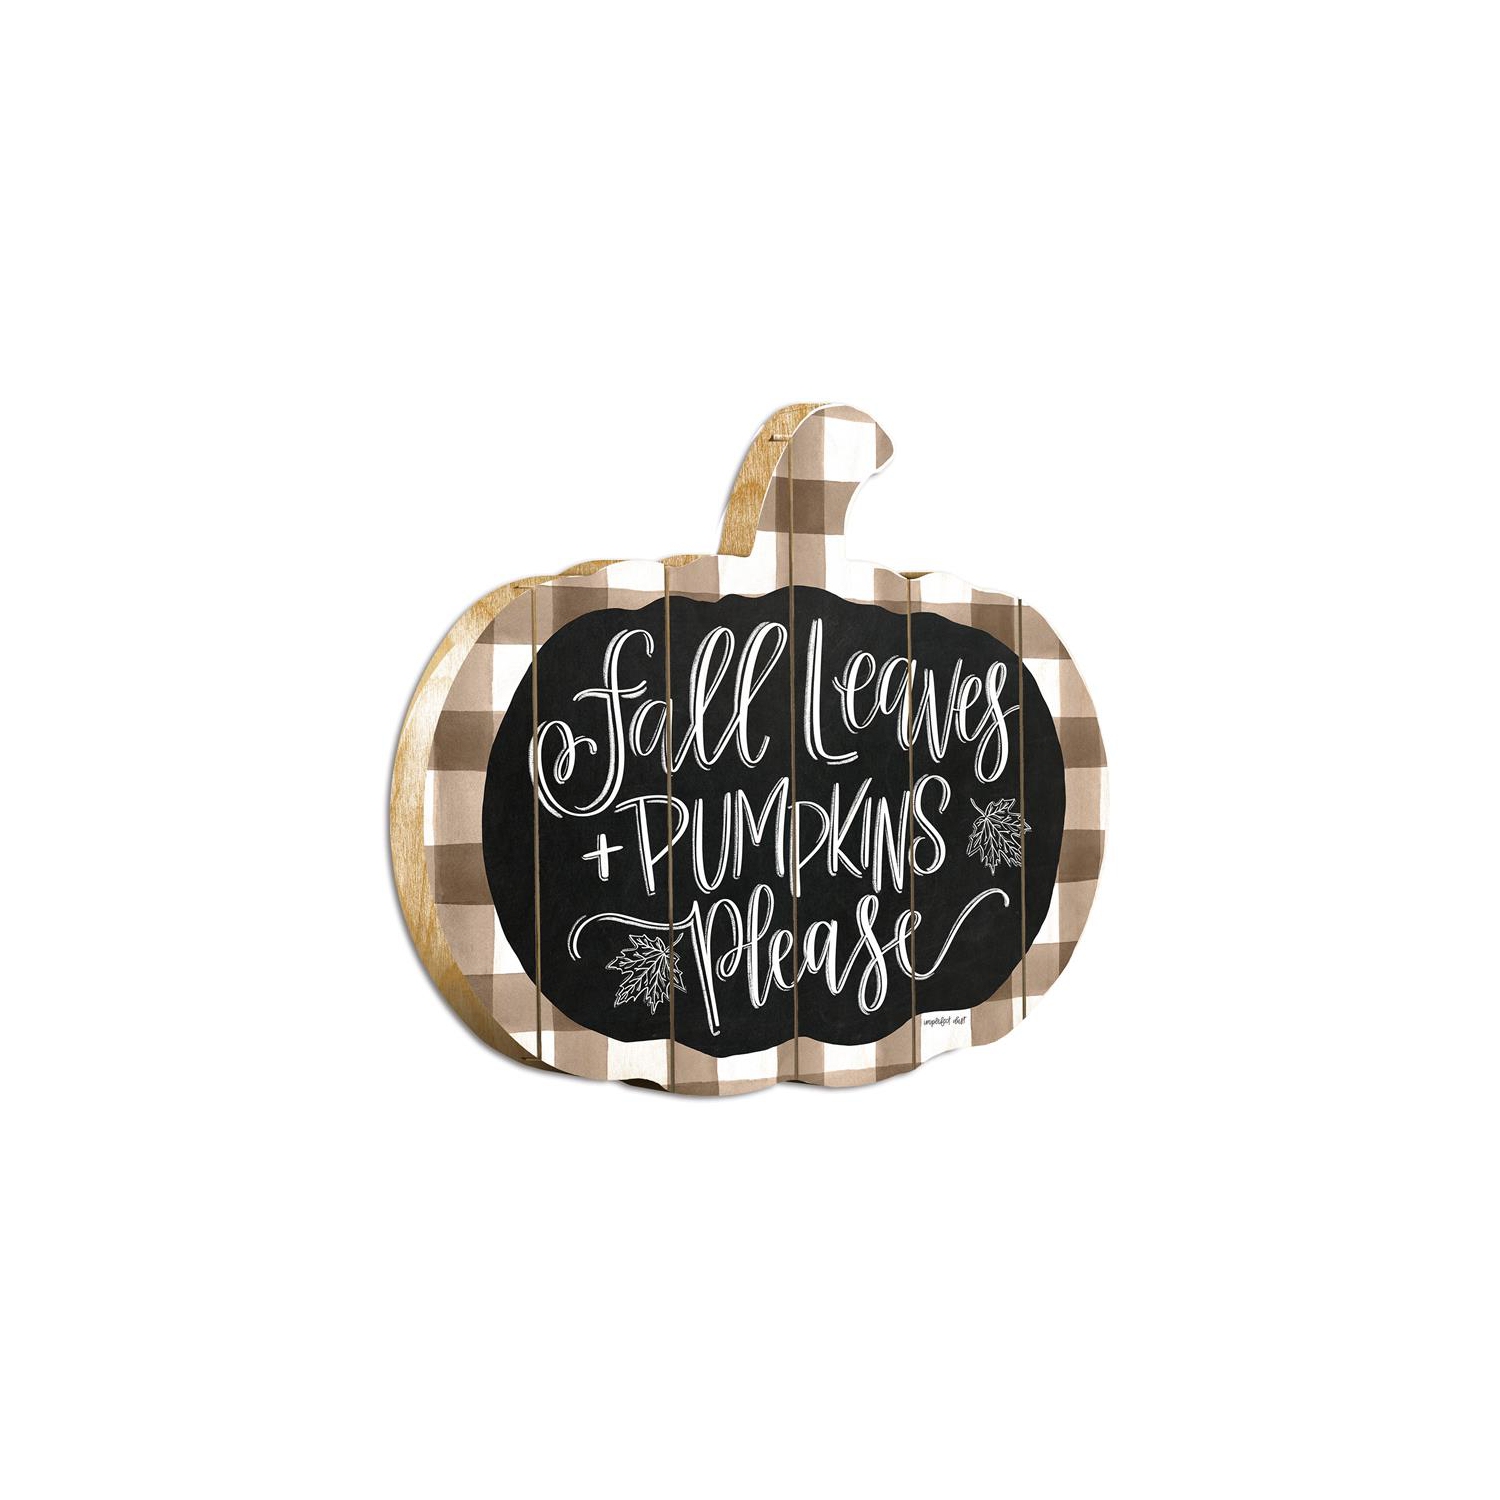 Fall Leaves and Pumpkins Please By Imperfect Dust on Wood Pumpkin Wall Art Tan